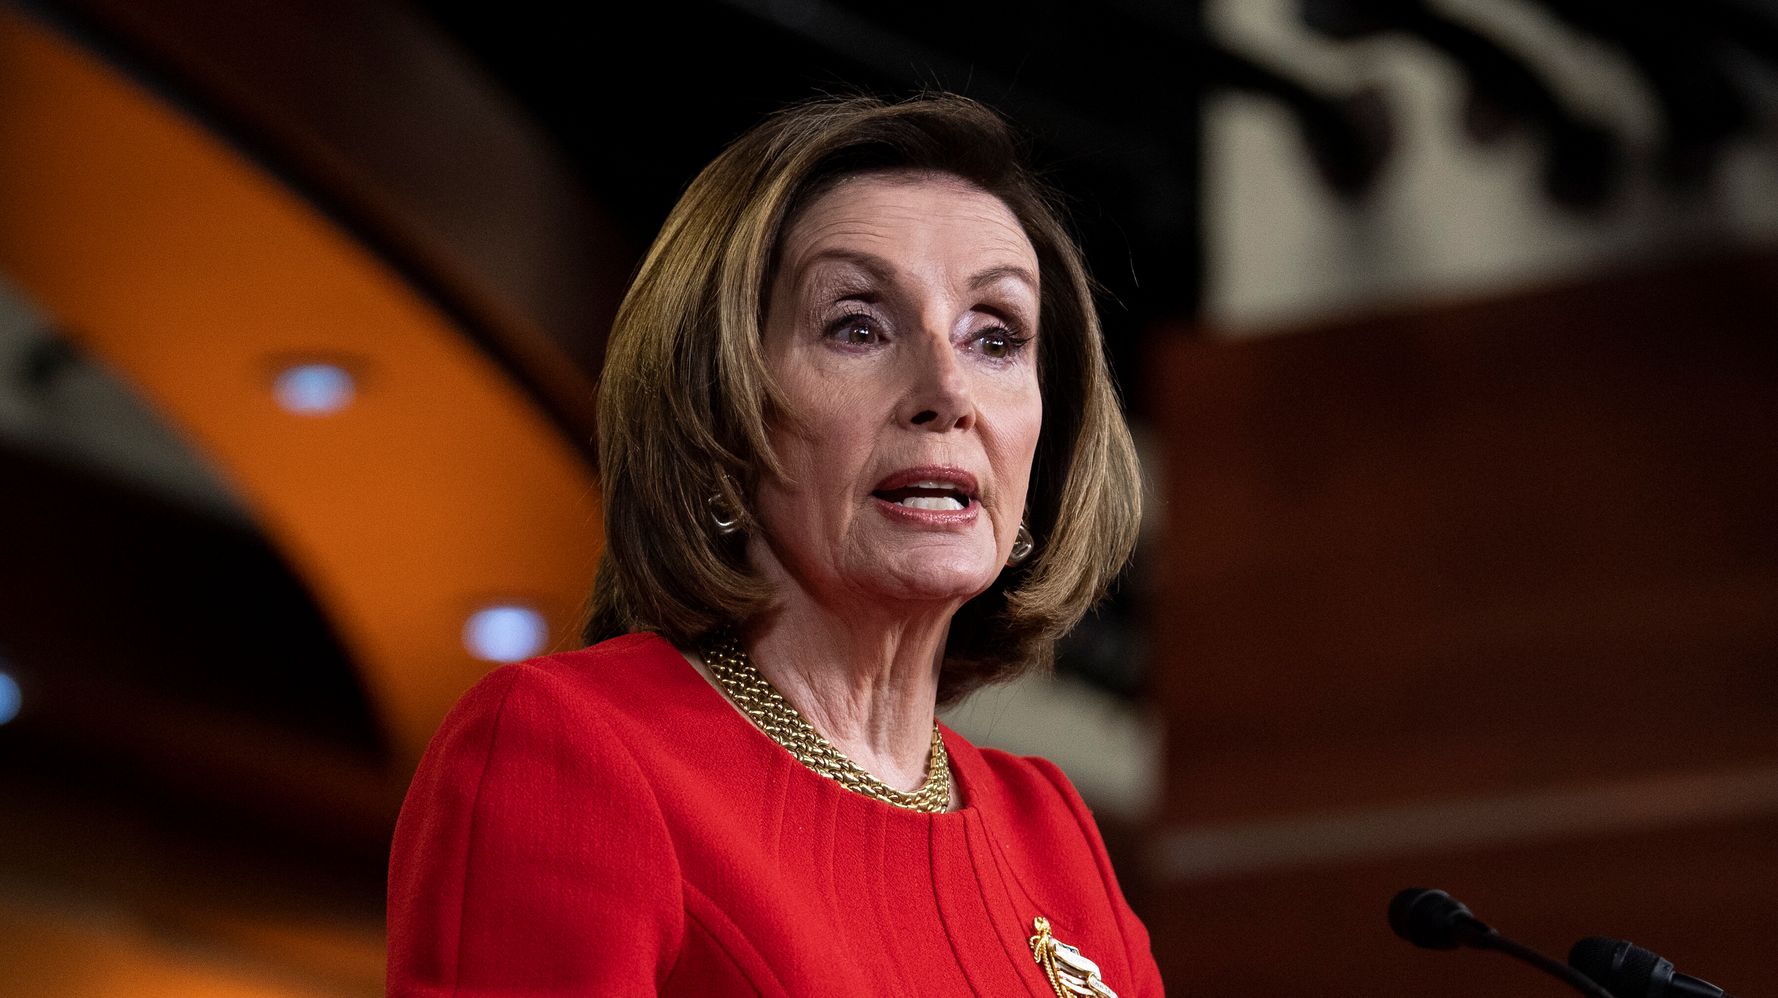 Nancy Pelosi Calls For Cease-Fire Between Israel And Hamas